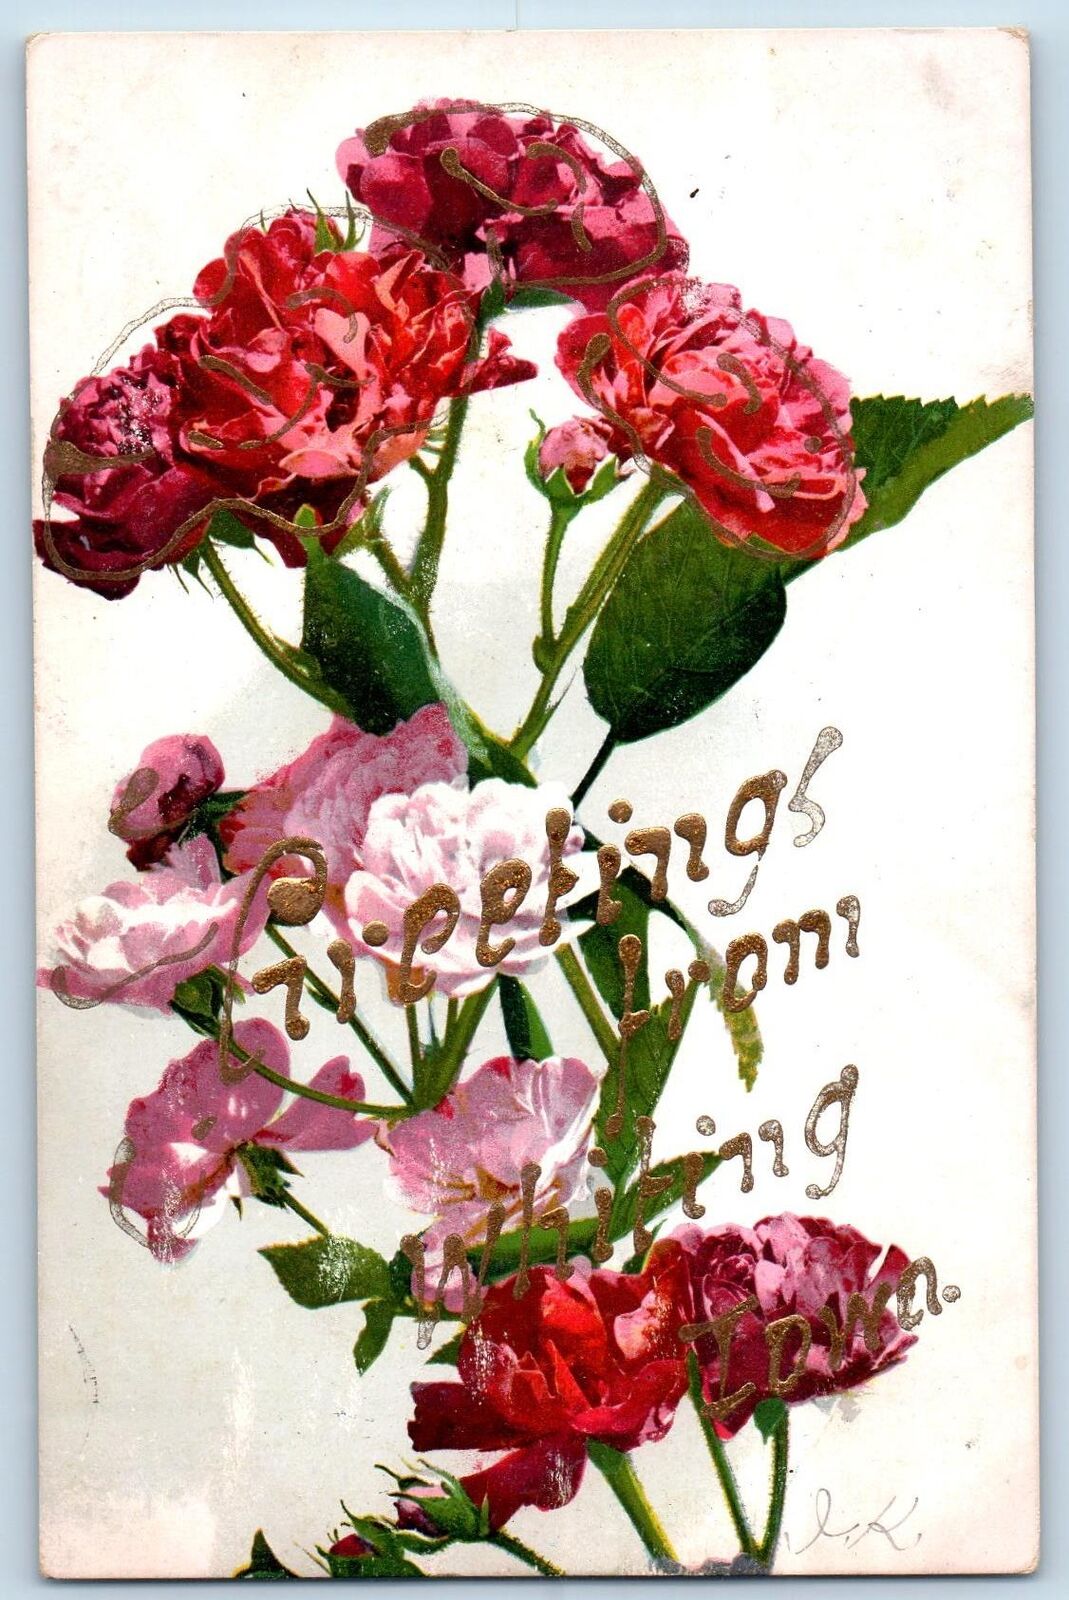 Whiting Iowa IA Postcard Greetings Embossed Flowers And Leaves 1914 Antique